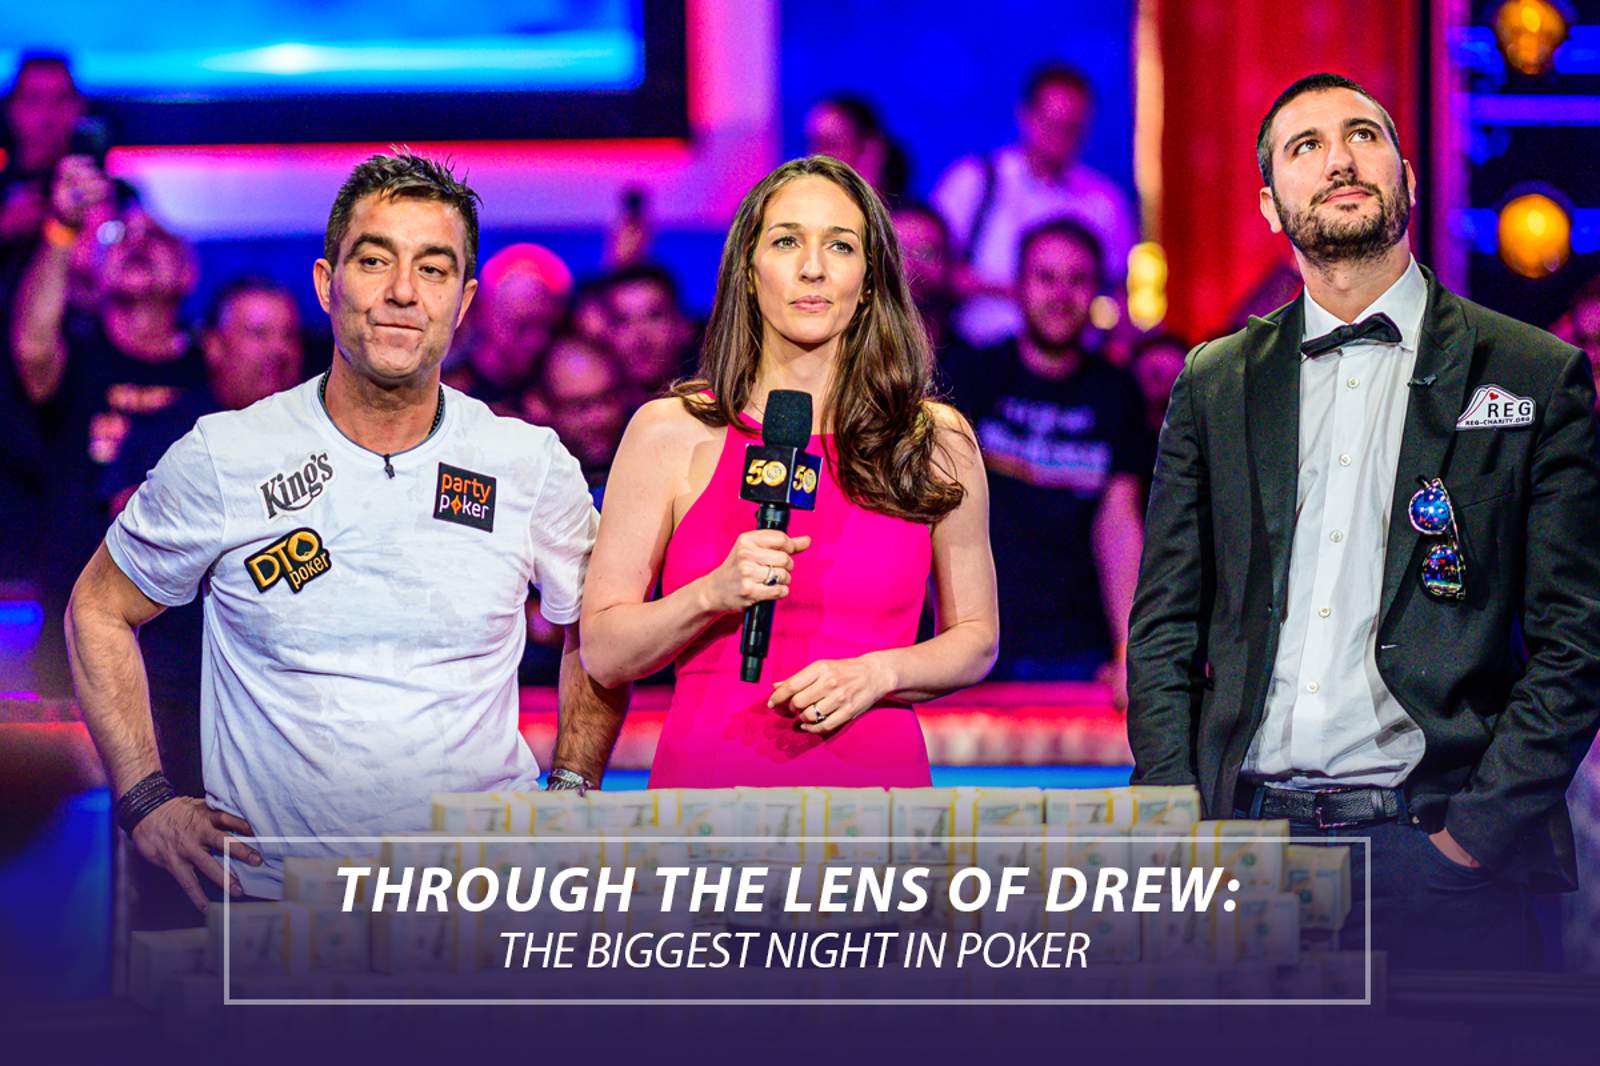 Through the Lens: The Biggest Night in Poker